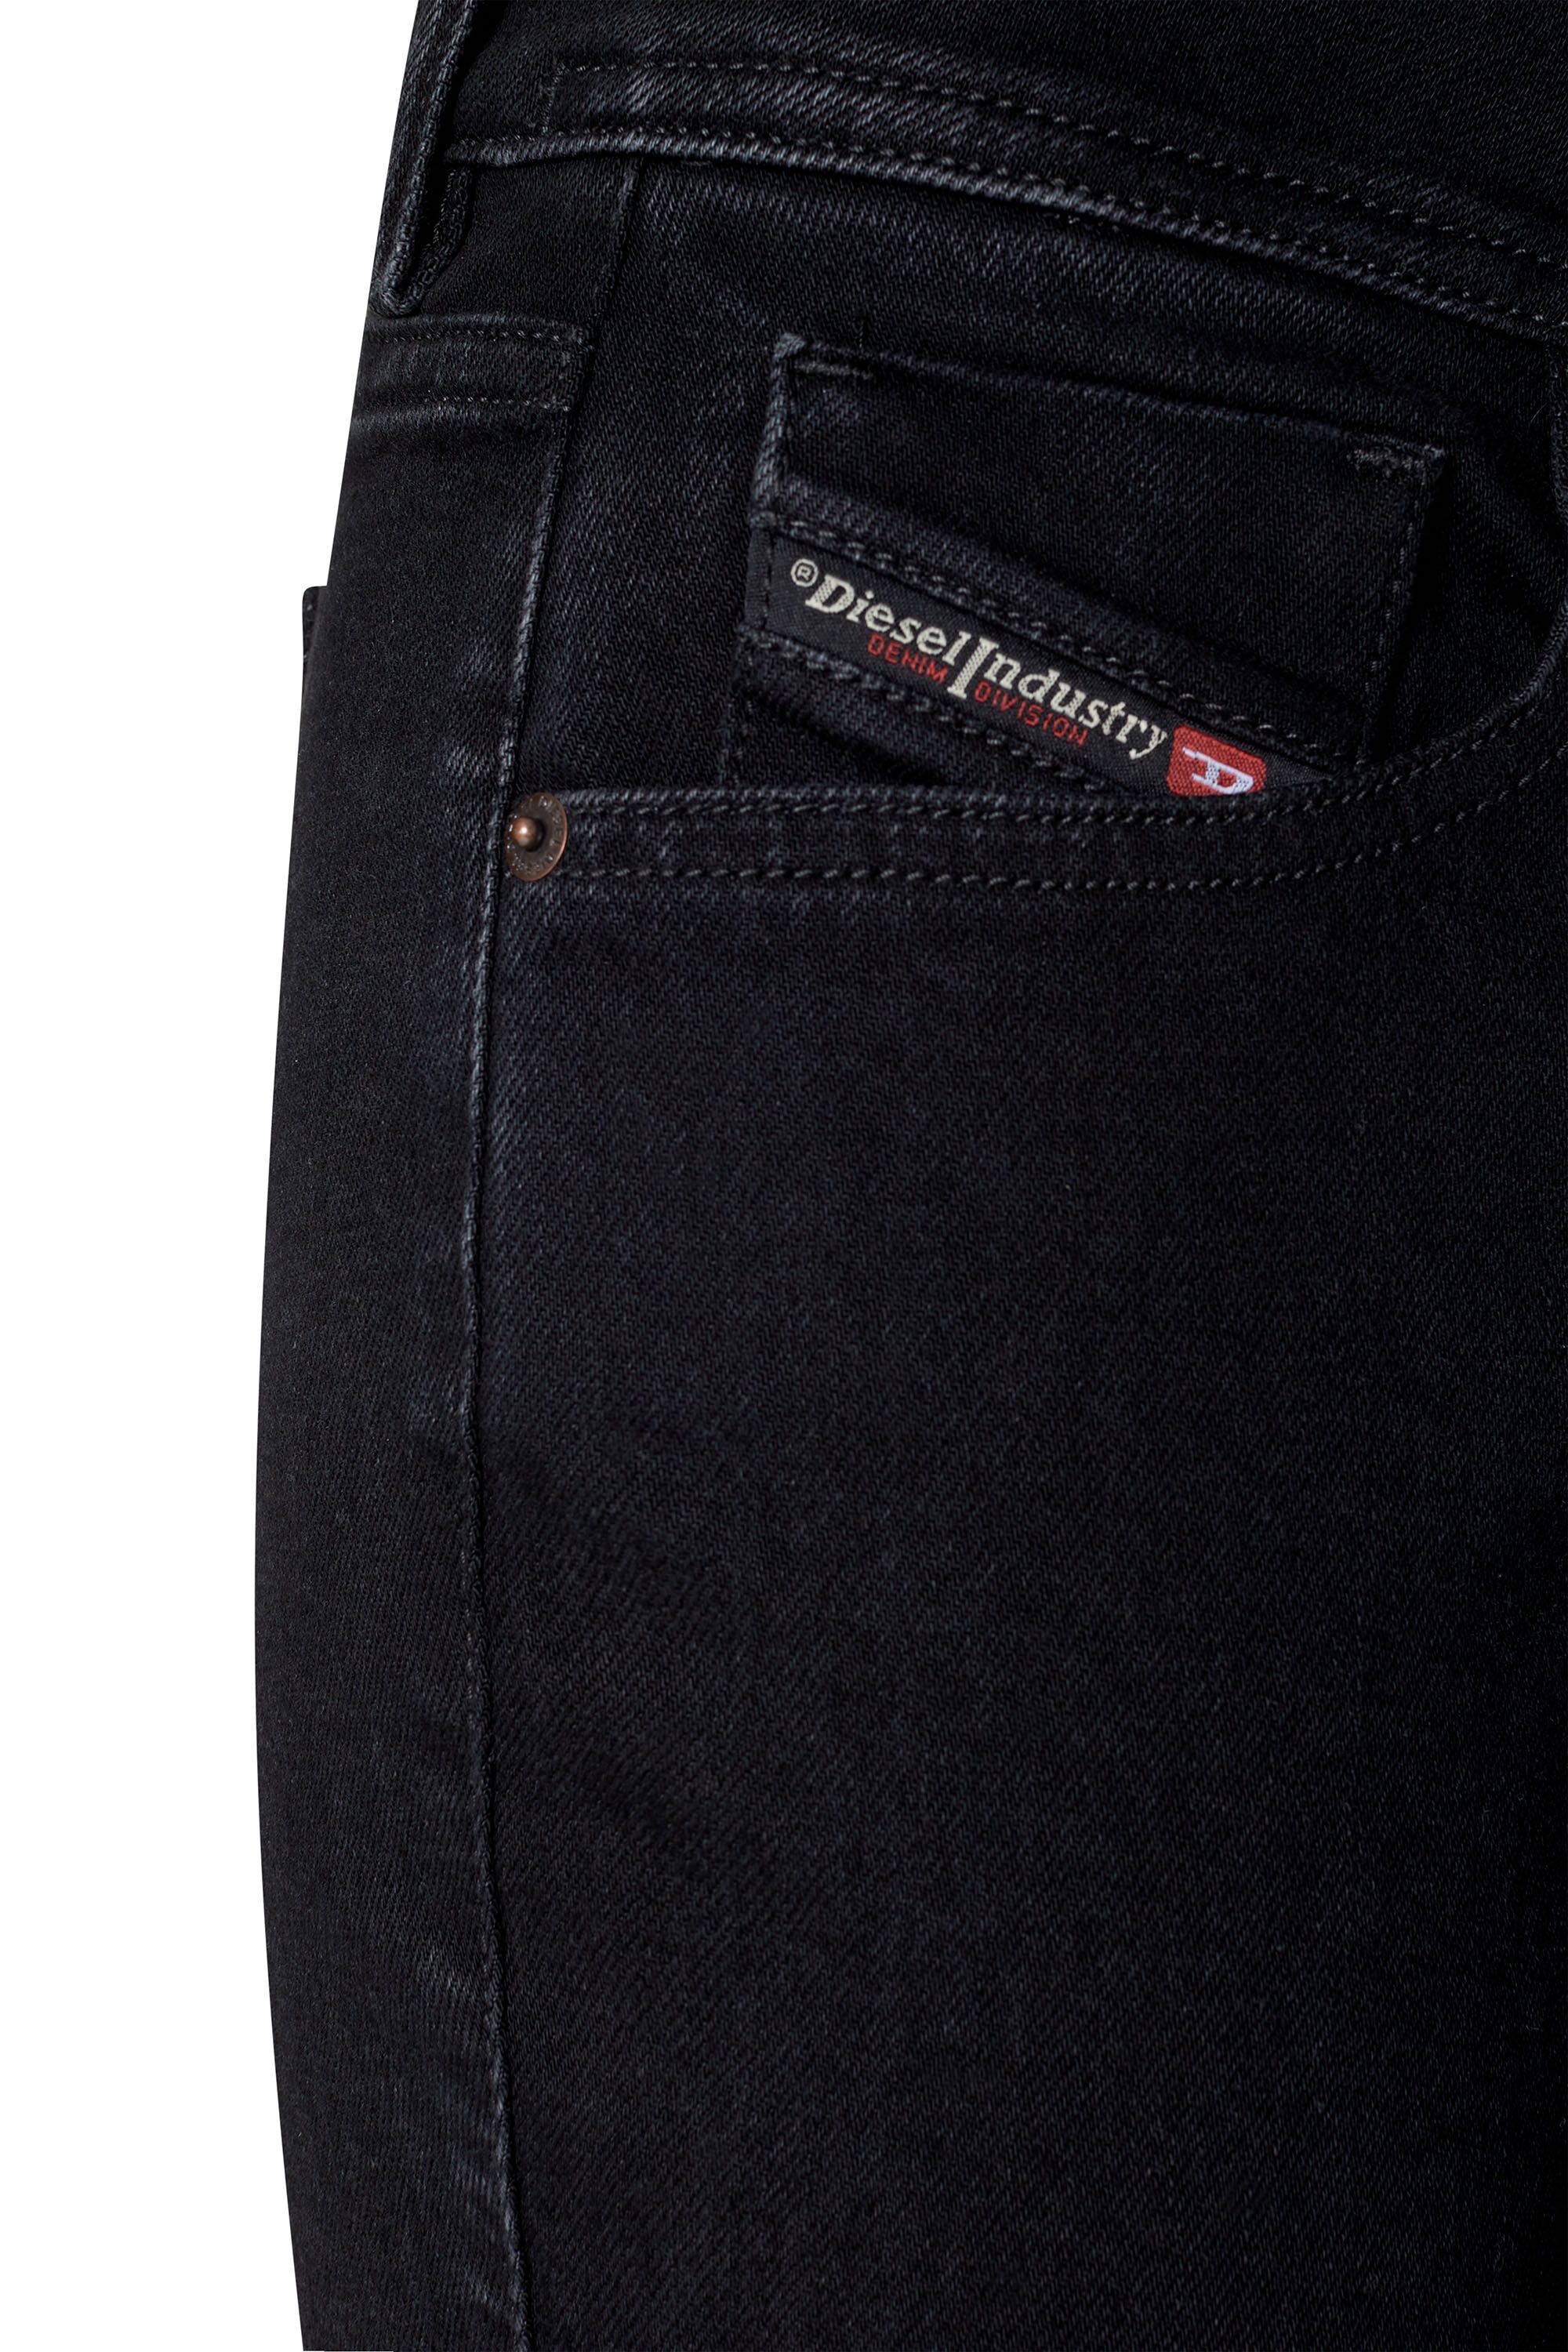 BOOTCUT AND FLARE JEANS 1969 D-EBBEY Z9C25 - 4